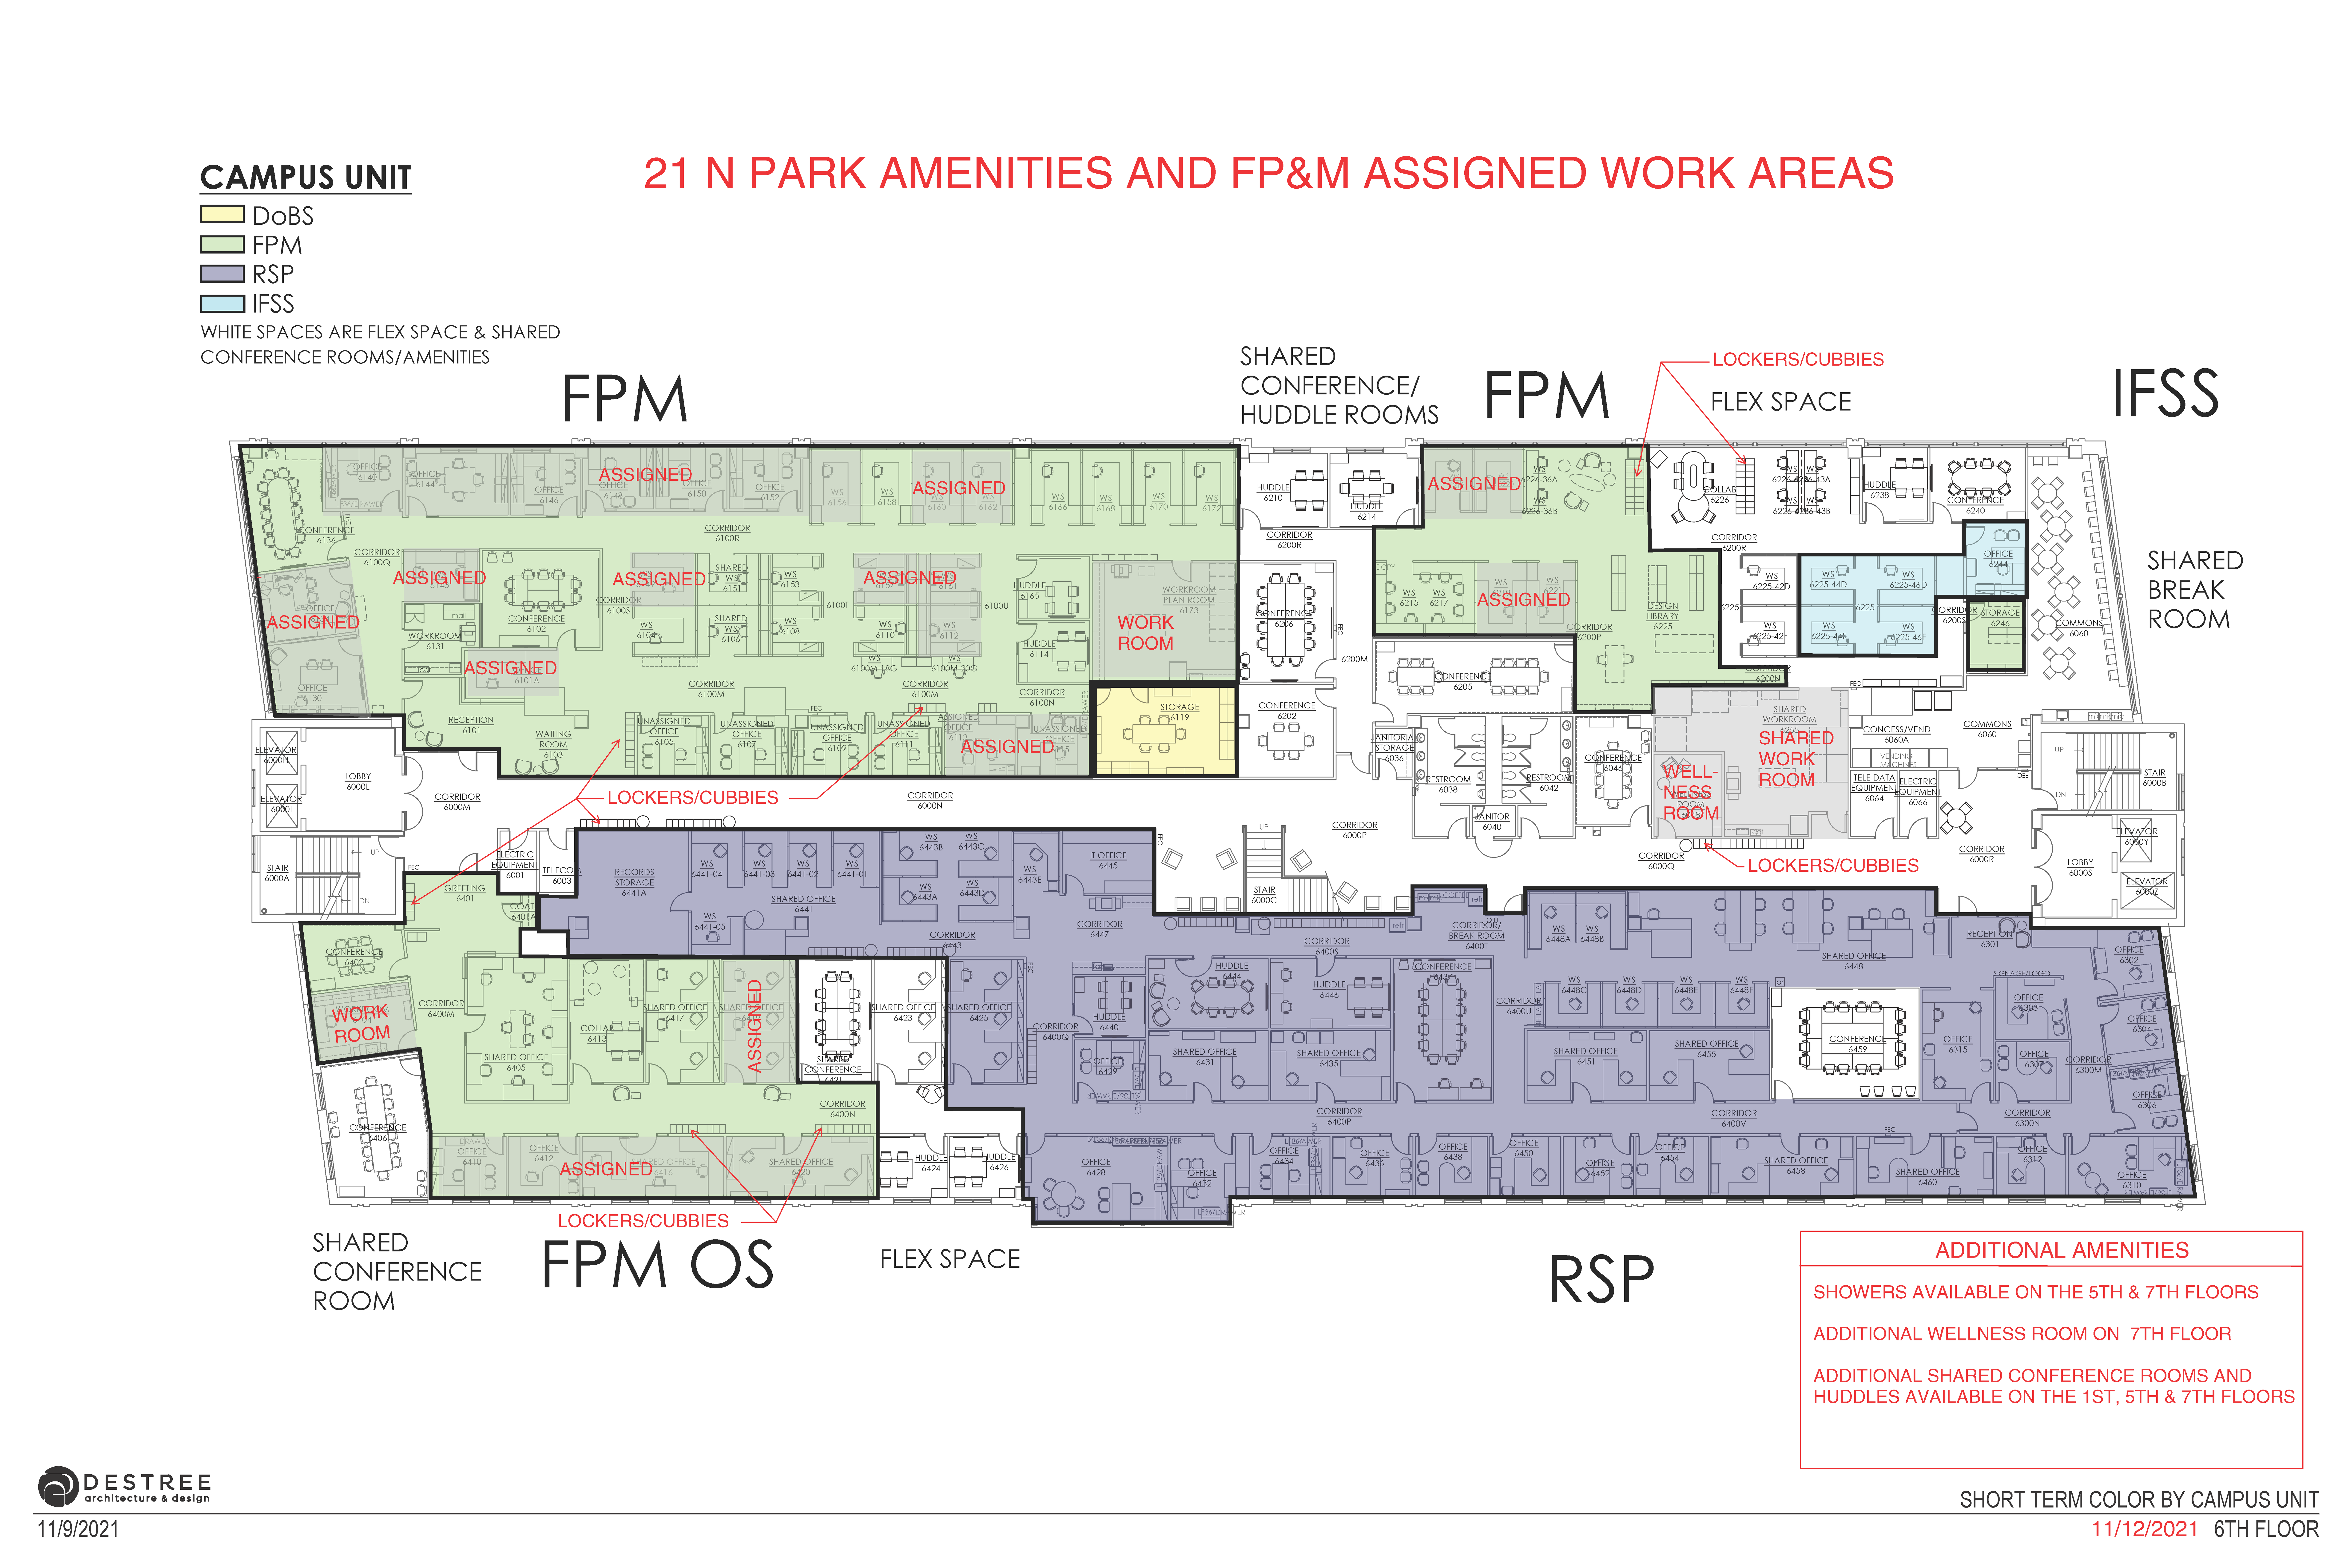 Floor plan of sixth floor, showing FP&M office space shaded in green, RSP in purple, and IFSS in aqua.